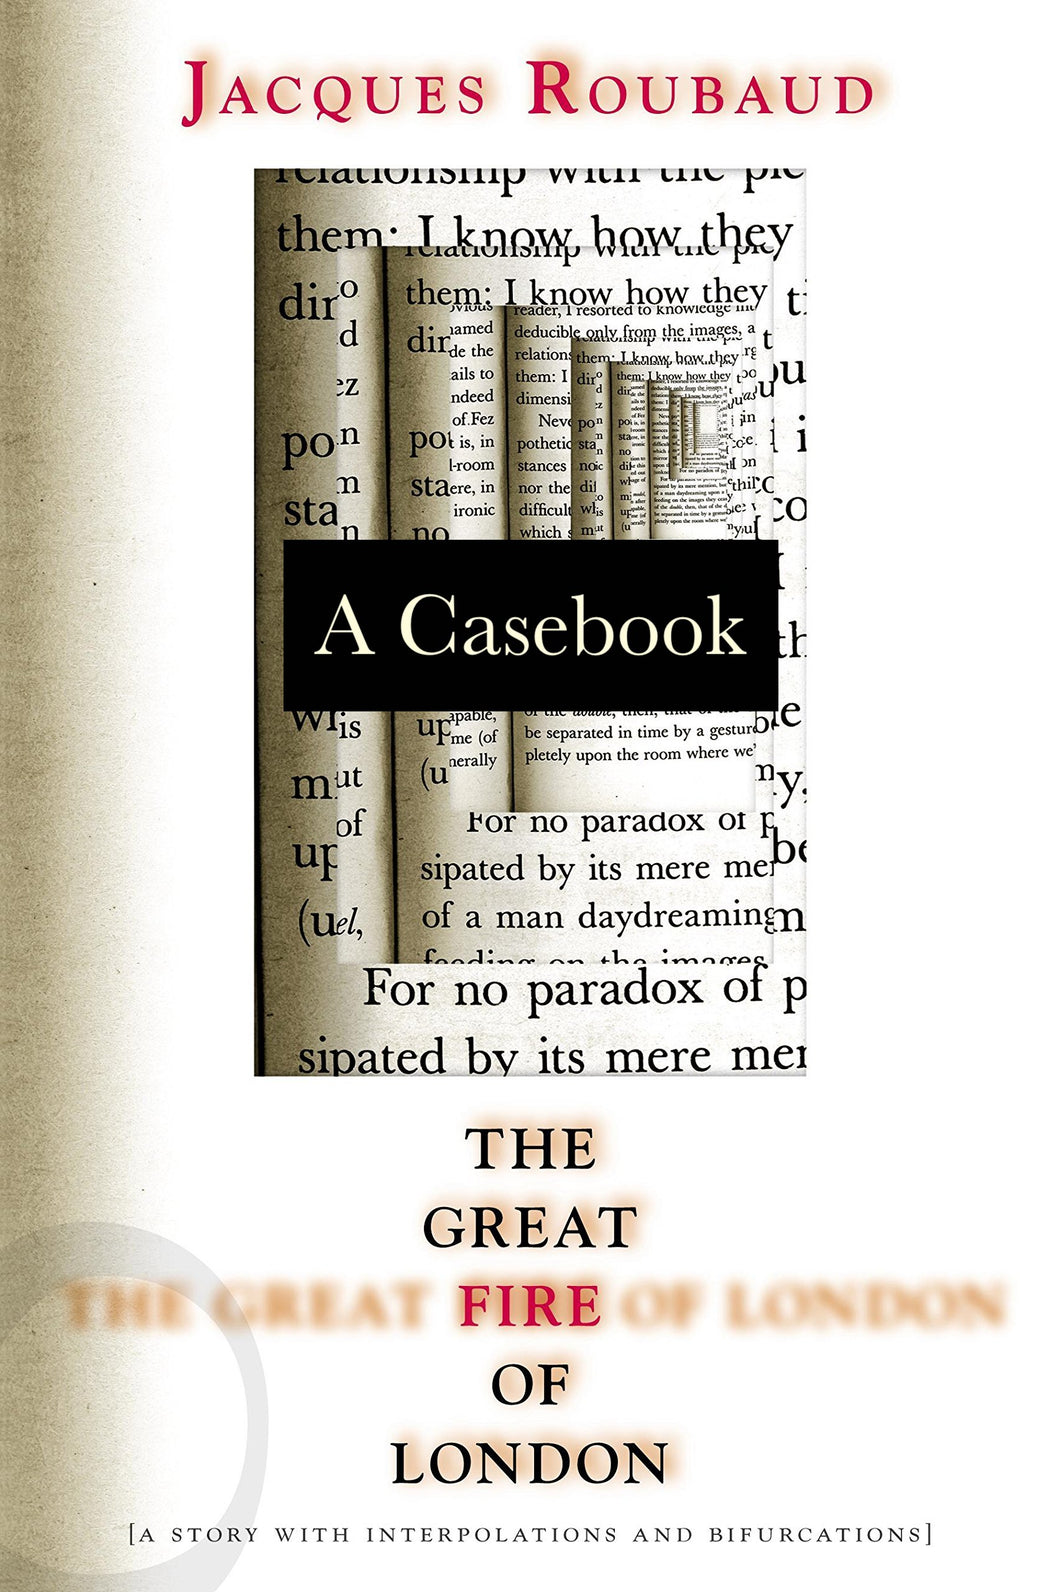 The Great Fire of London: A Casebook